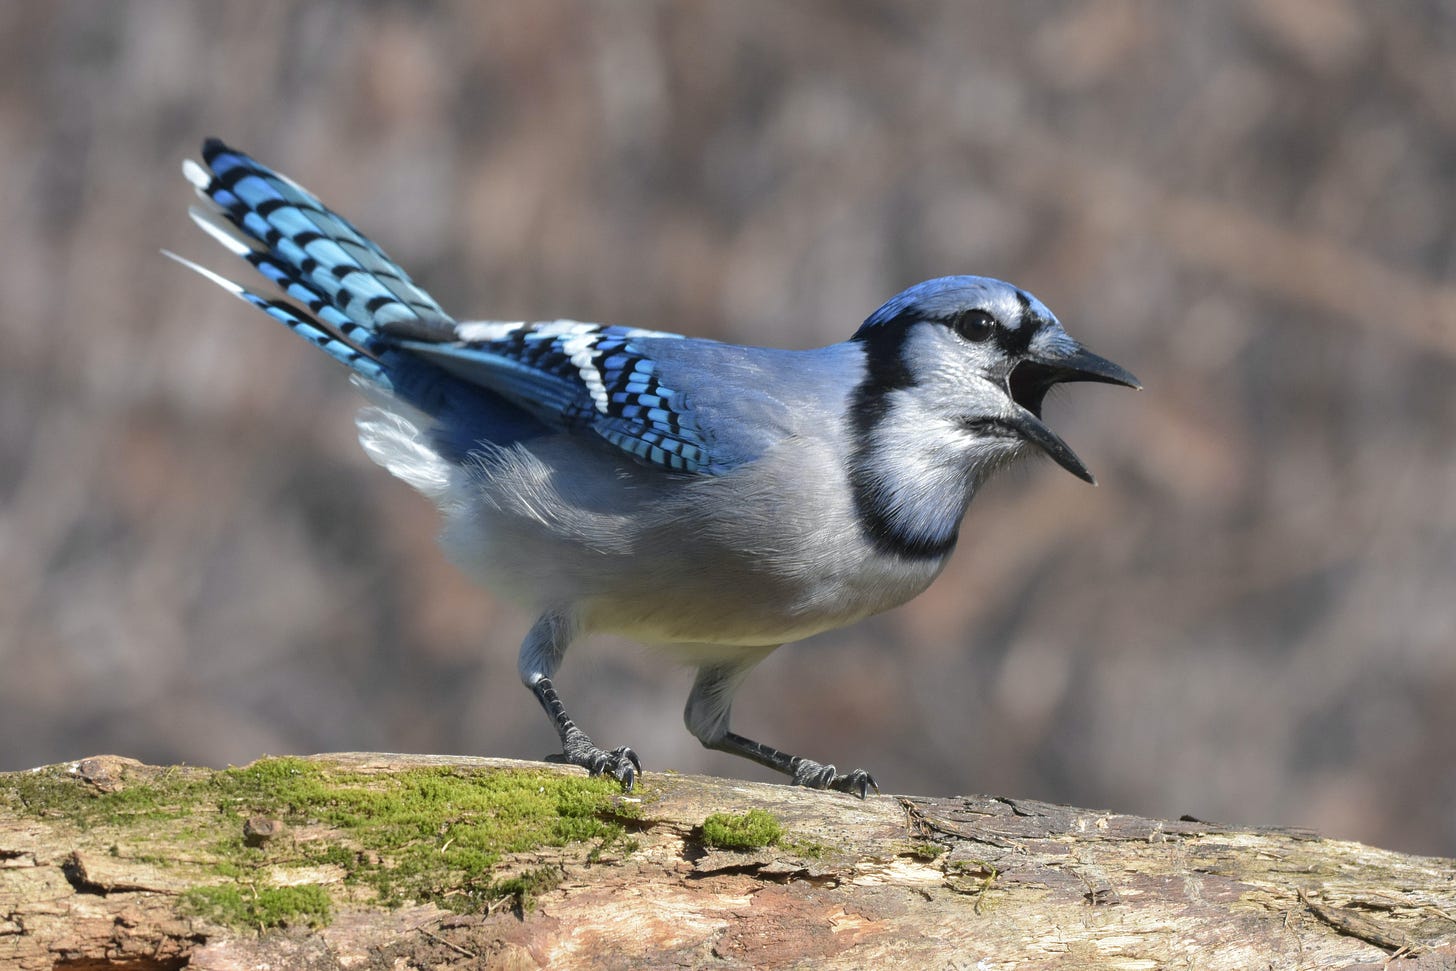 A bluejay perched on a log with its beak open and looking derpy